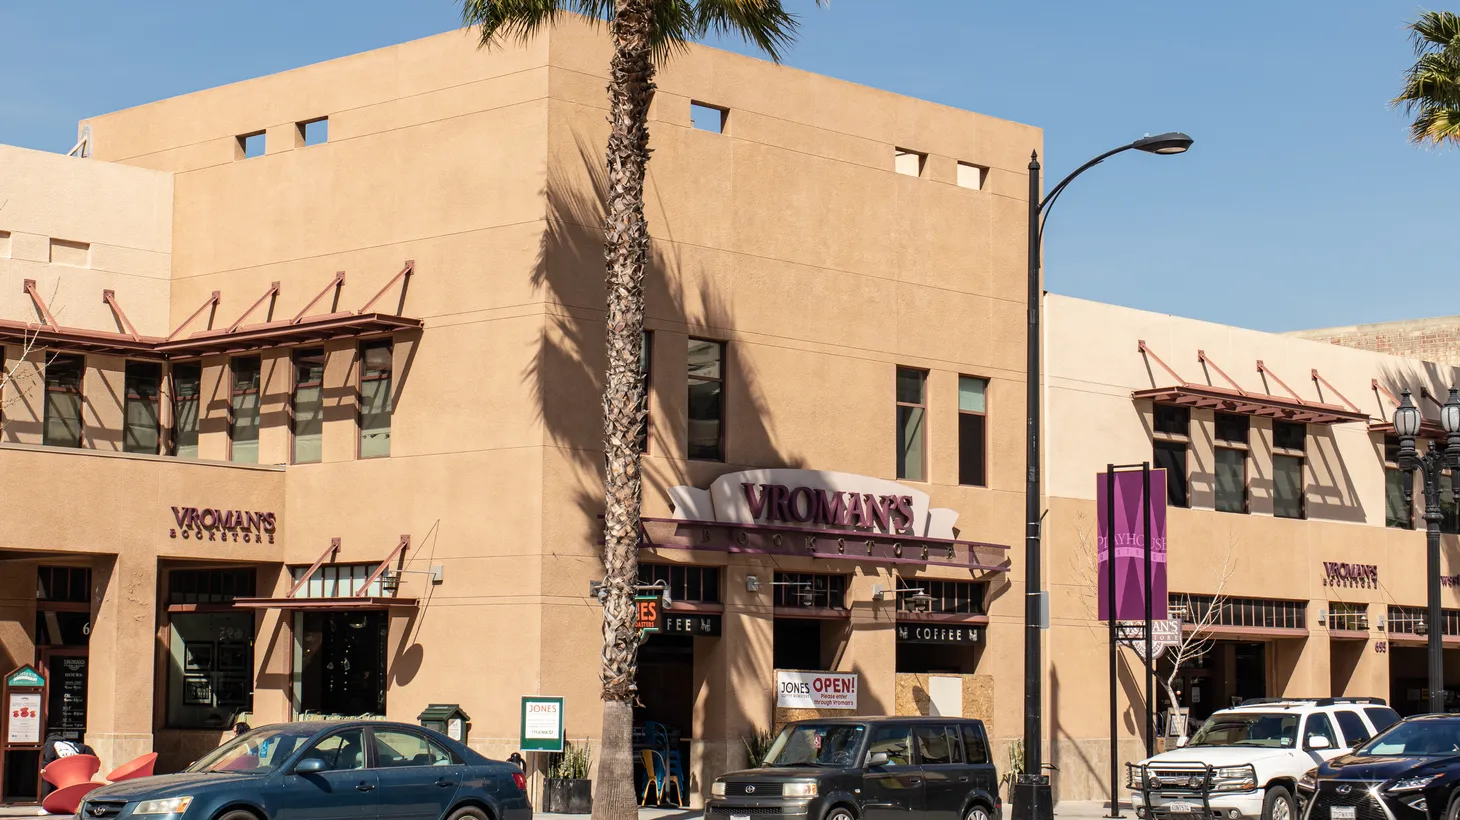 Vroman’s Bookstore in Pasadena has hosted accomplished writers such as John Muir, Joan Didion, Ray Bradbury, and former President Jimmy Carter.